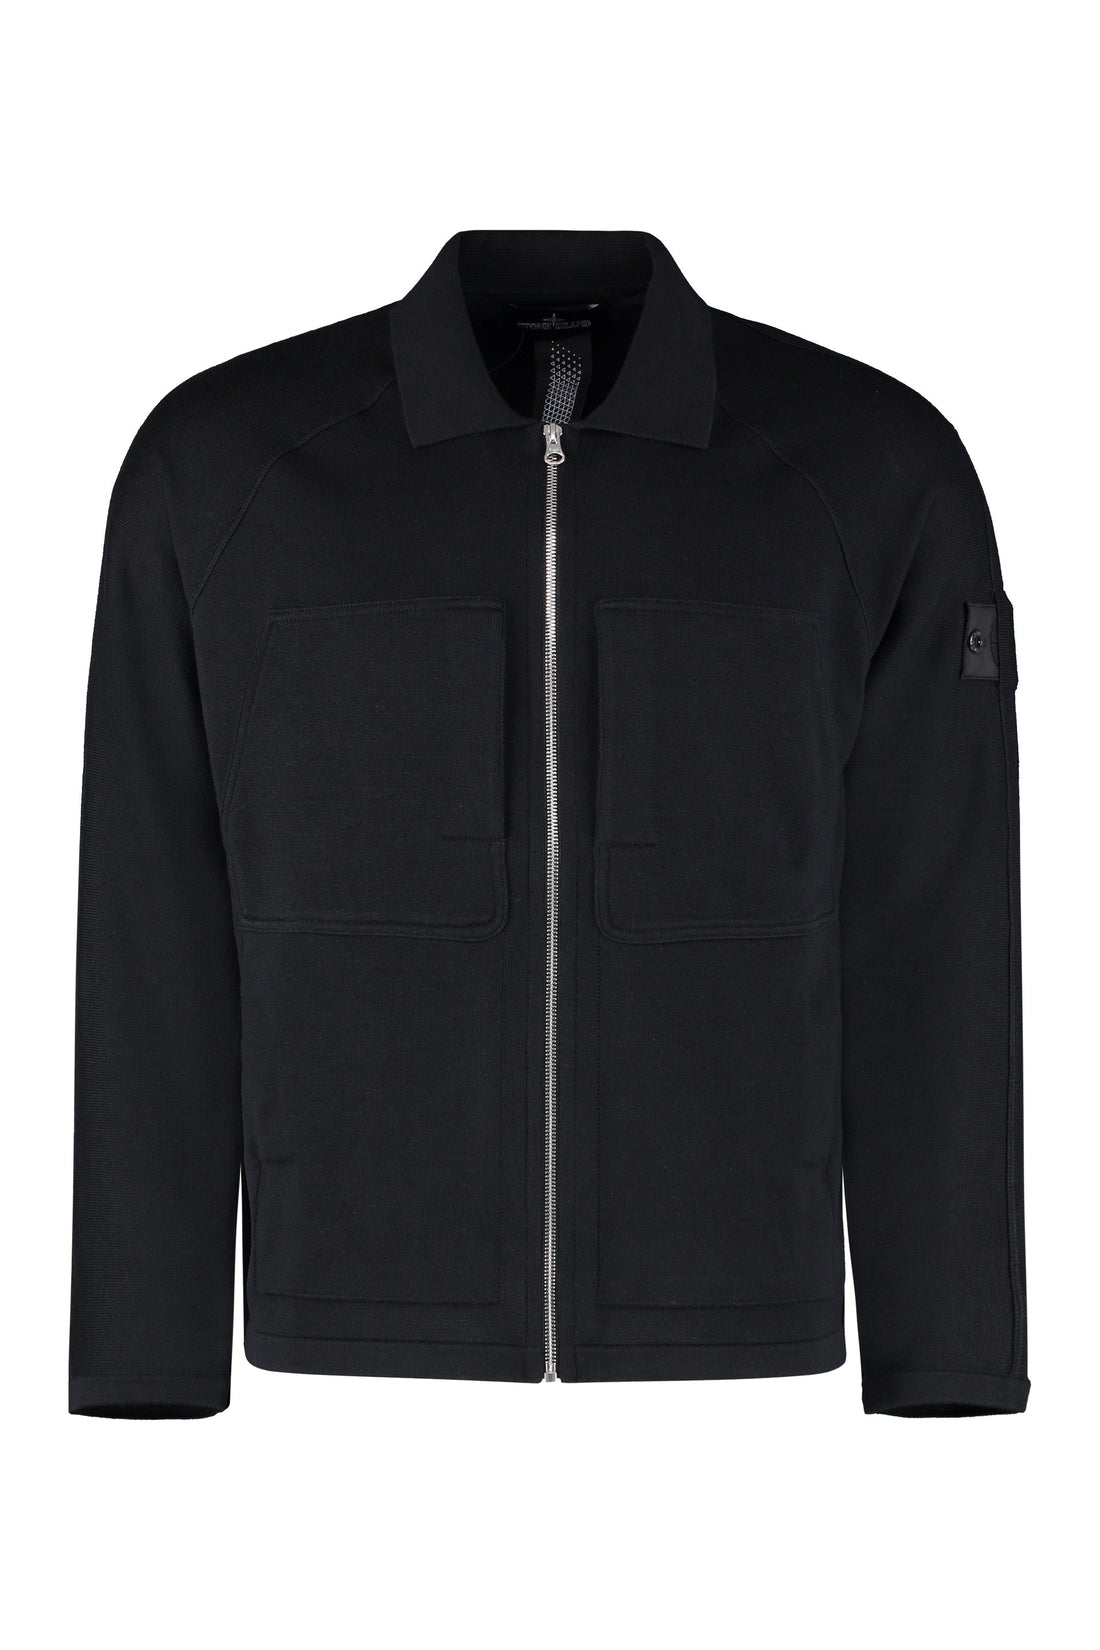 Stone Island Shadow Project-OUTLET-SALE-Wool-blend full-zip cardigan-ARCHIVIST